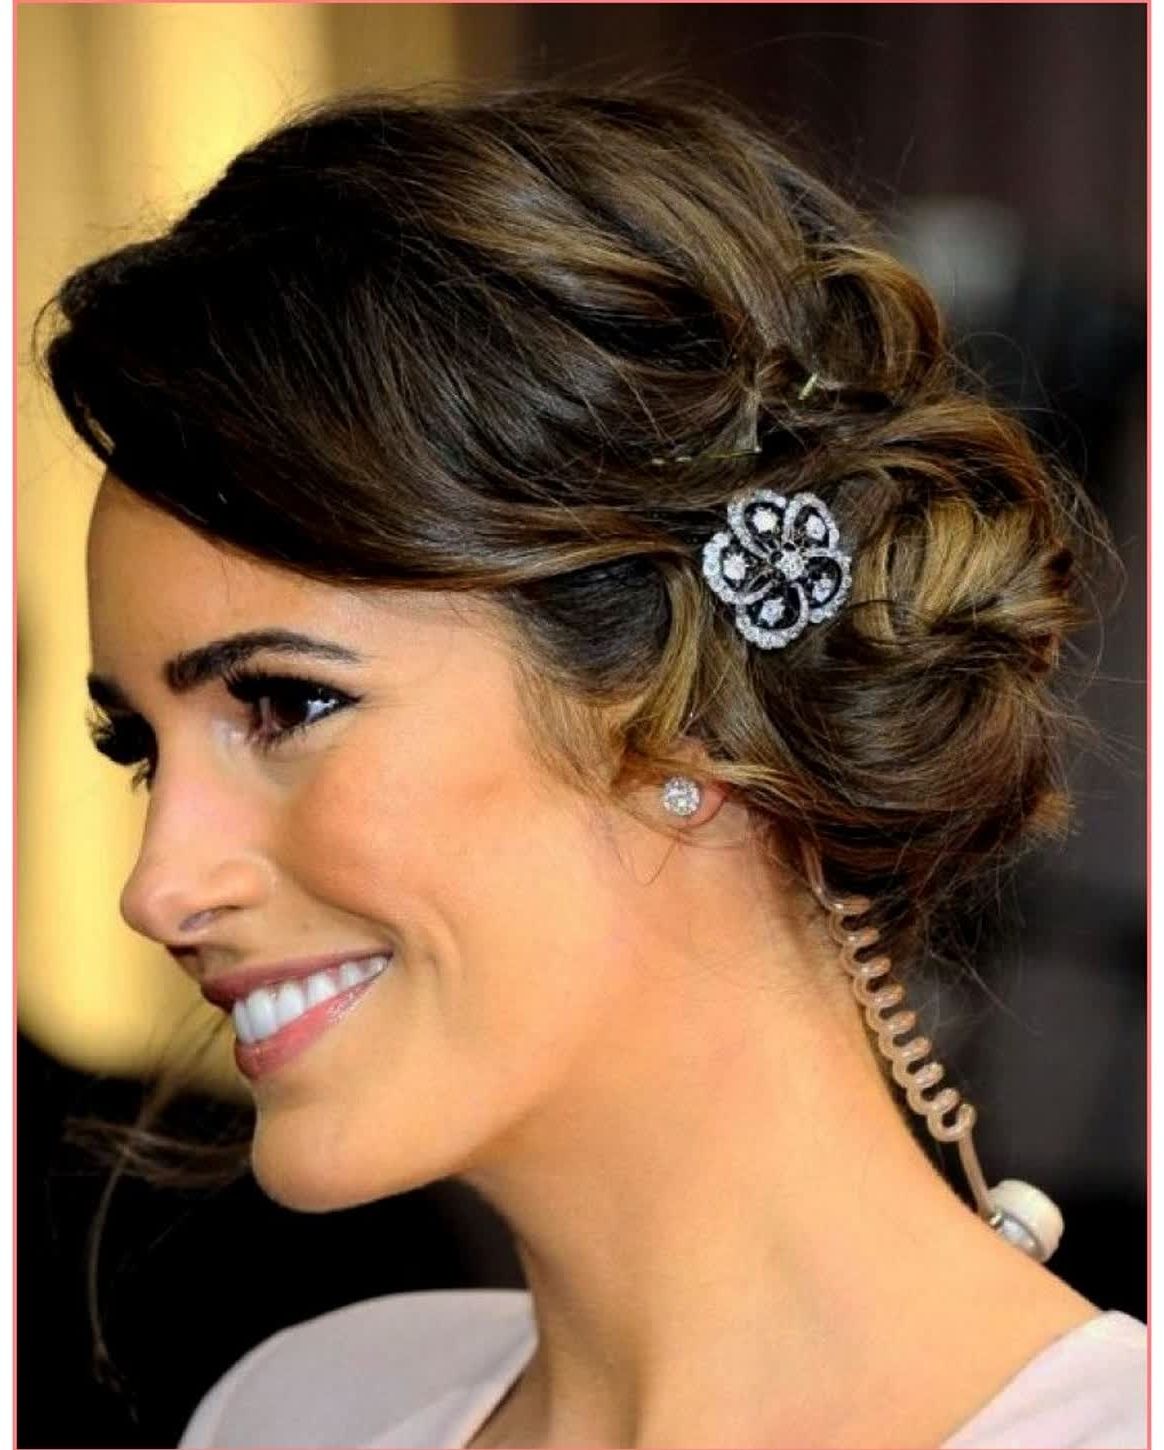 Widely Used Wedding Hairstyles For Long Hair With Round Face In Cute Hairstyles Wedding Hairstyles For Short Hair Round Face – Best (View 8 of 15)